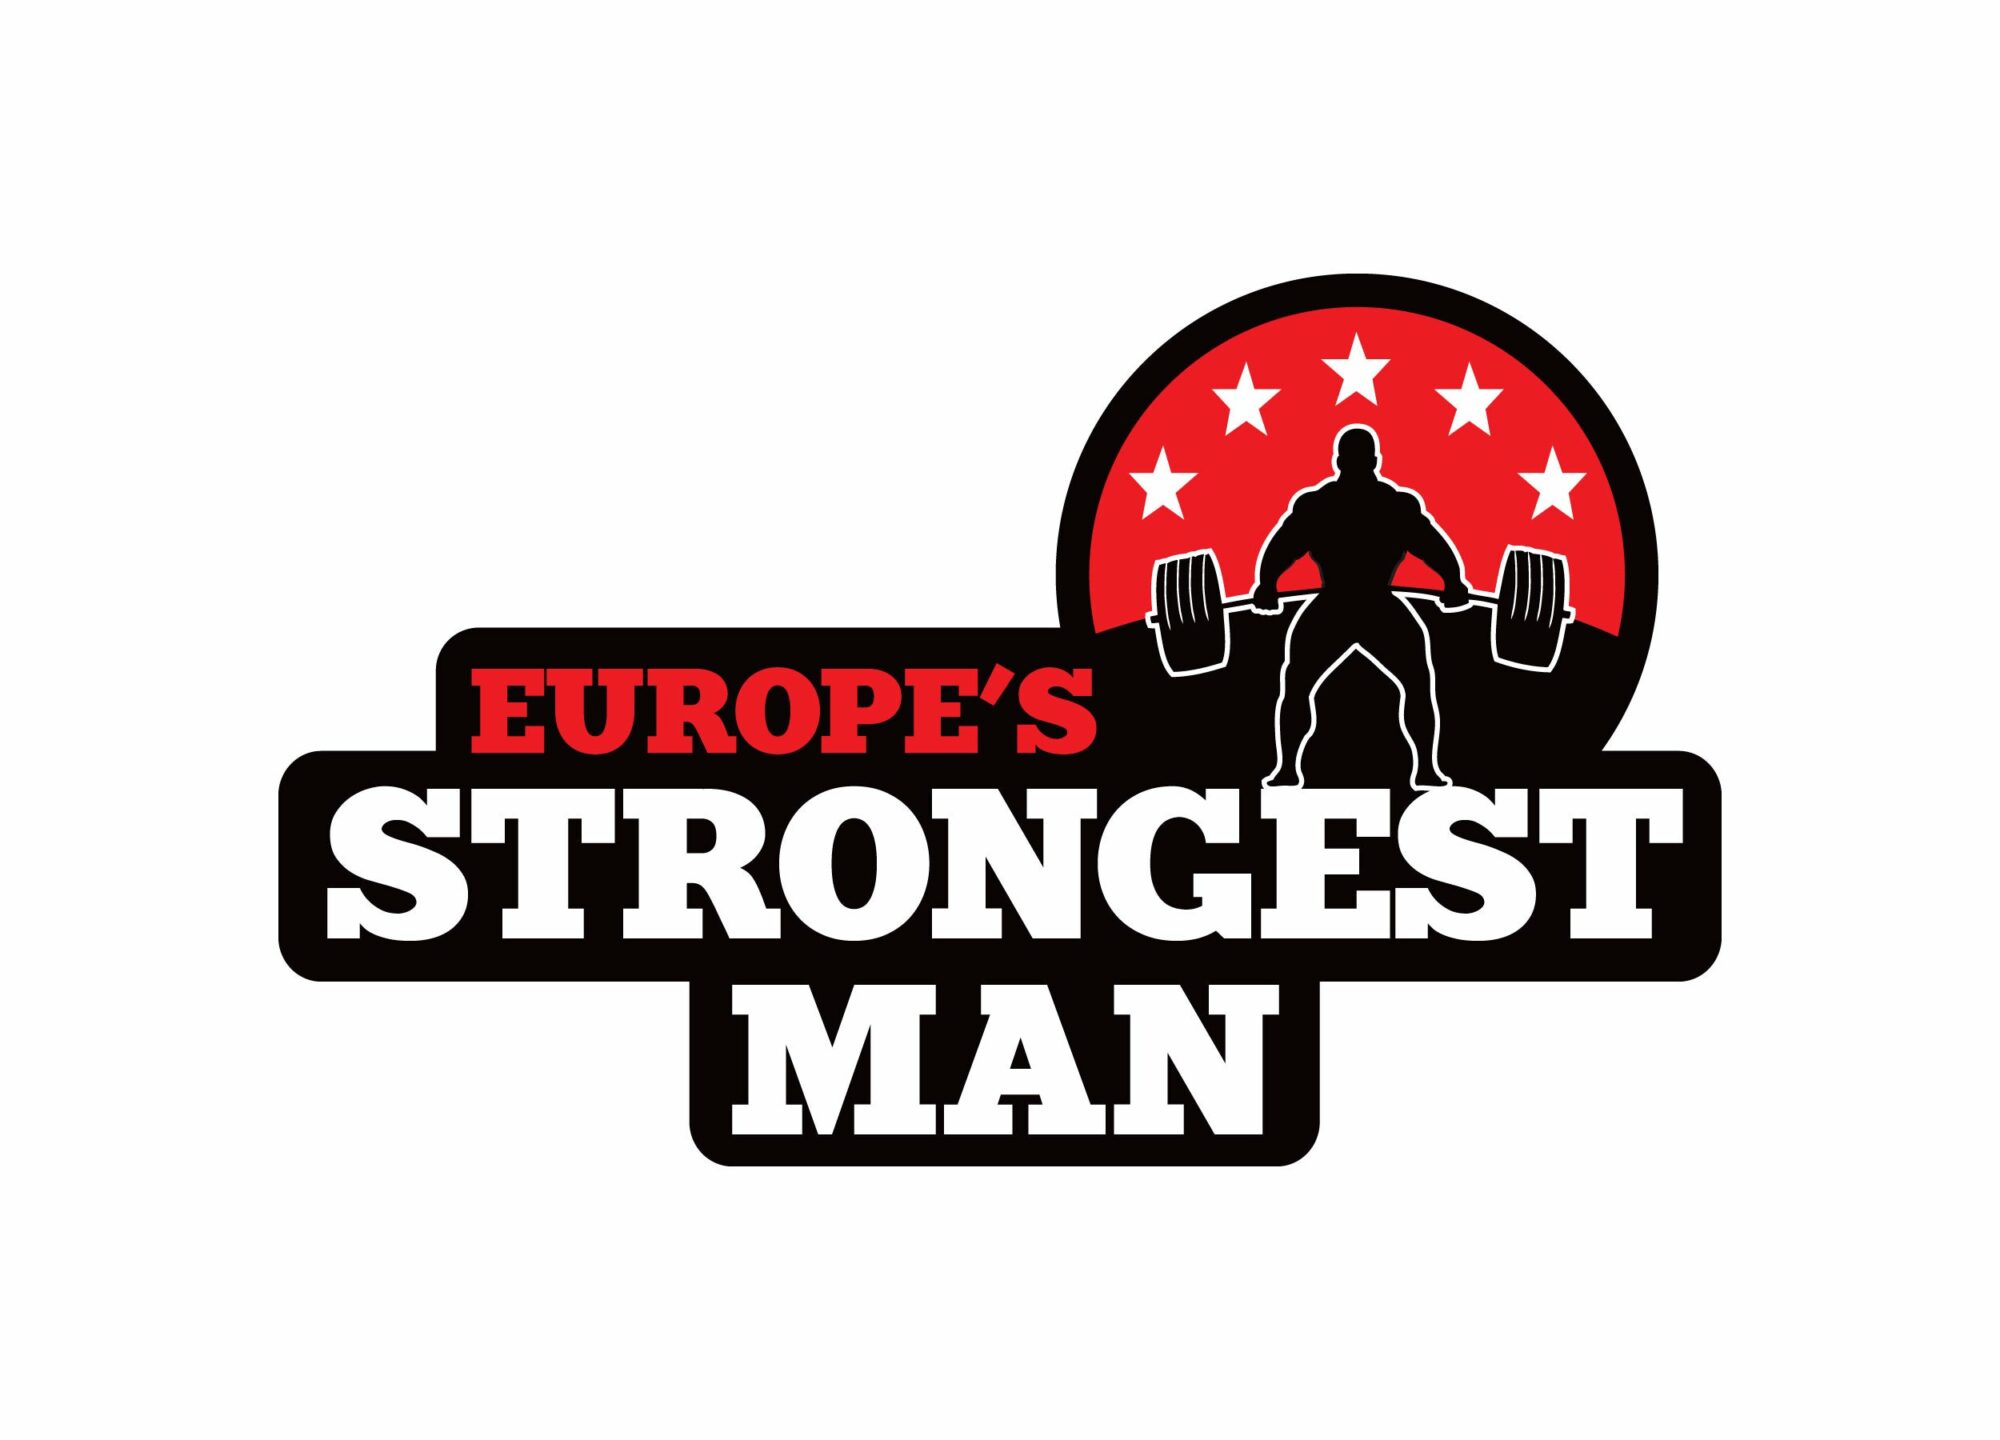 Image name Europes Strongest Man 2024 Premium Package the Gallery at First Direct Arena Leeds the 21 image from the post Europe's Strongest Man - Premium Package - Suites at First Direct Arena, Leeds in Yorkshire.com.